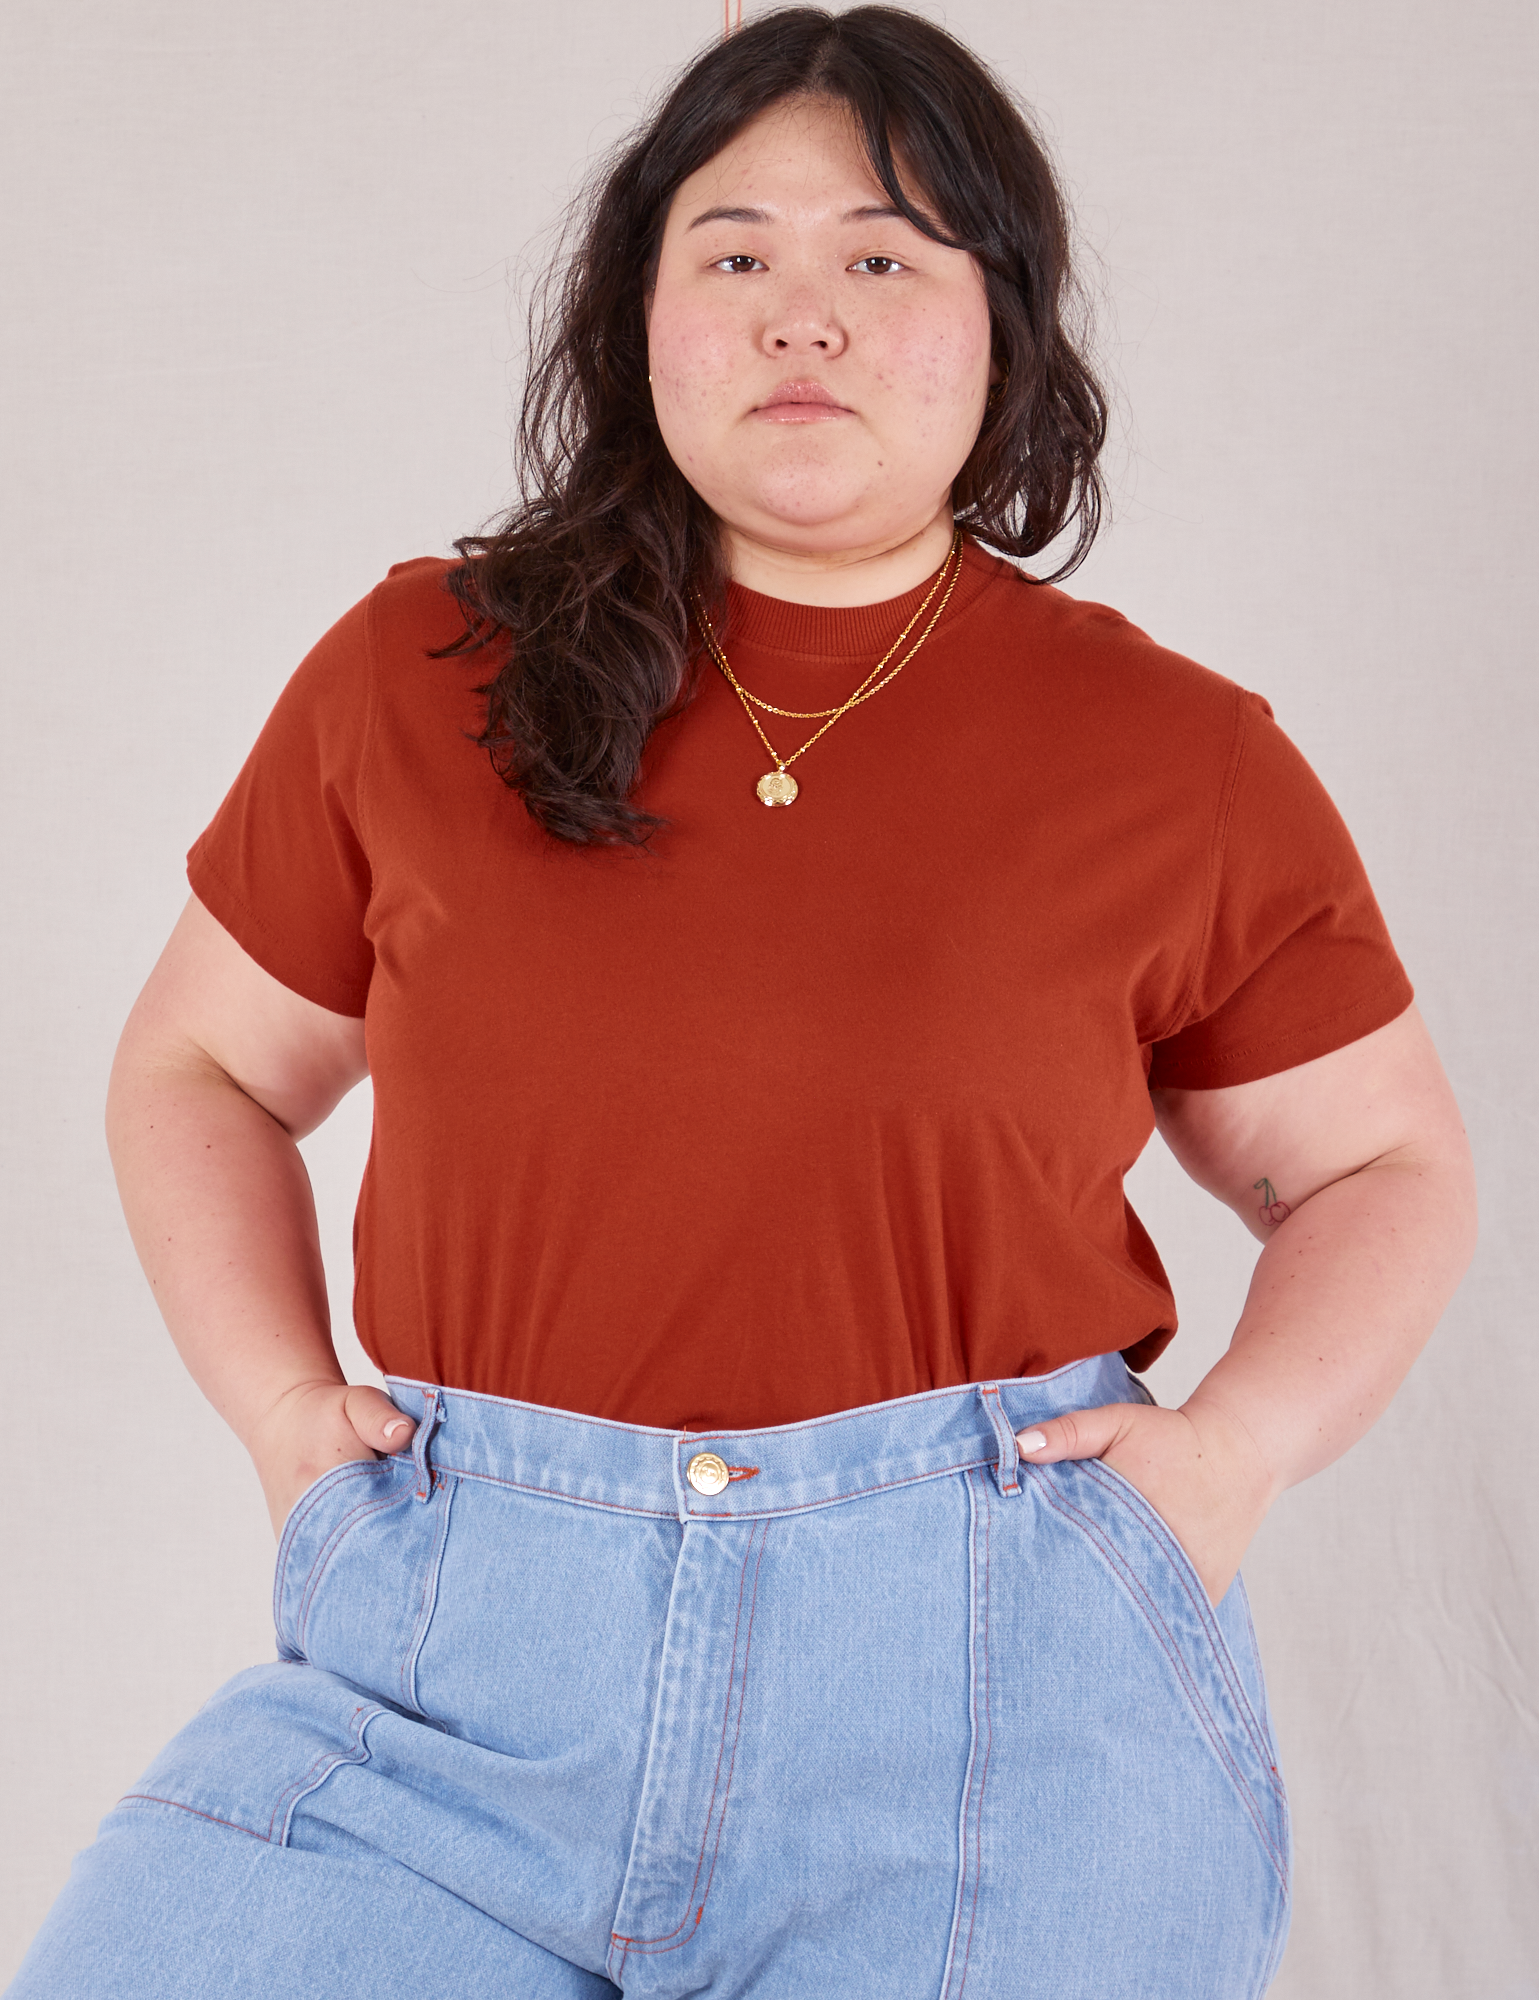 Ashley is wearing Organic Vintage Tee in Paprika tucked into light wash Carpenter Jeans